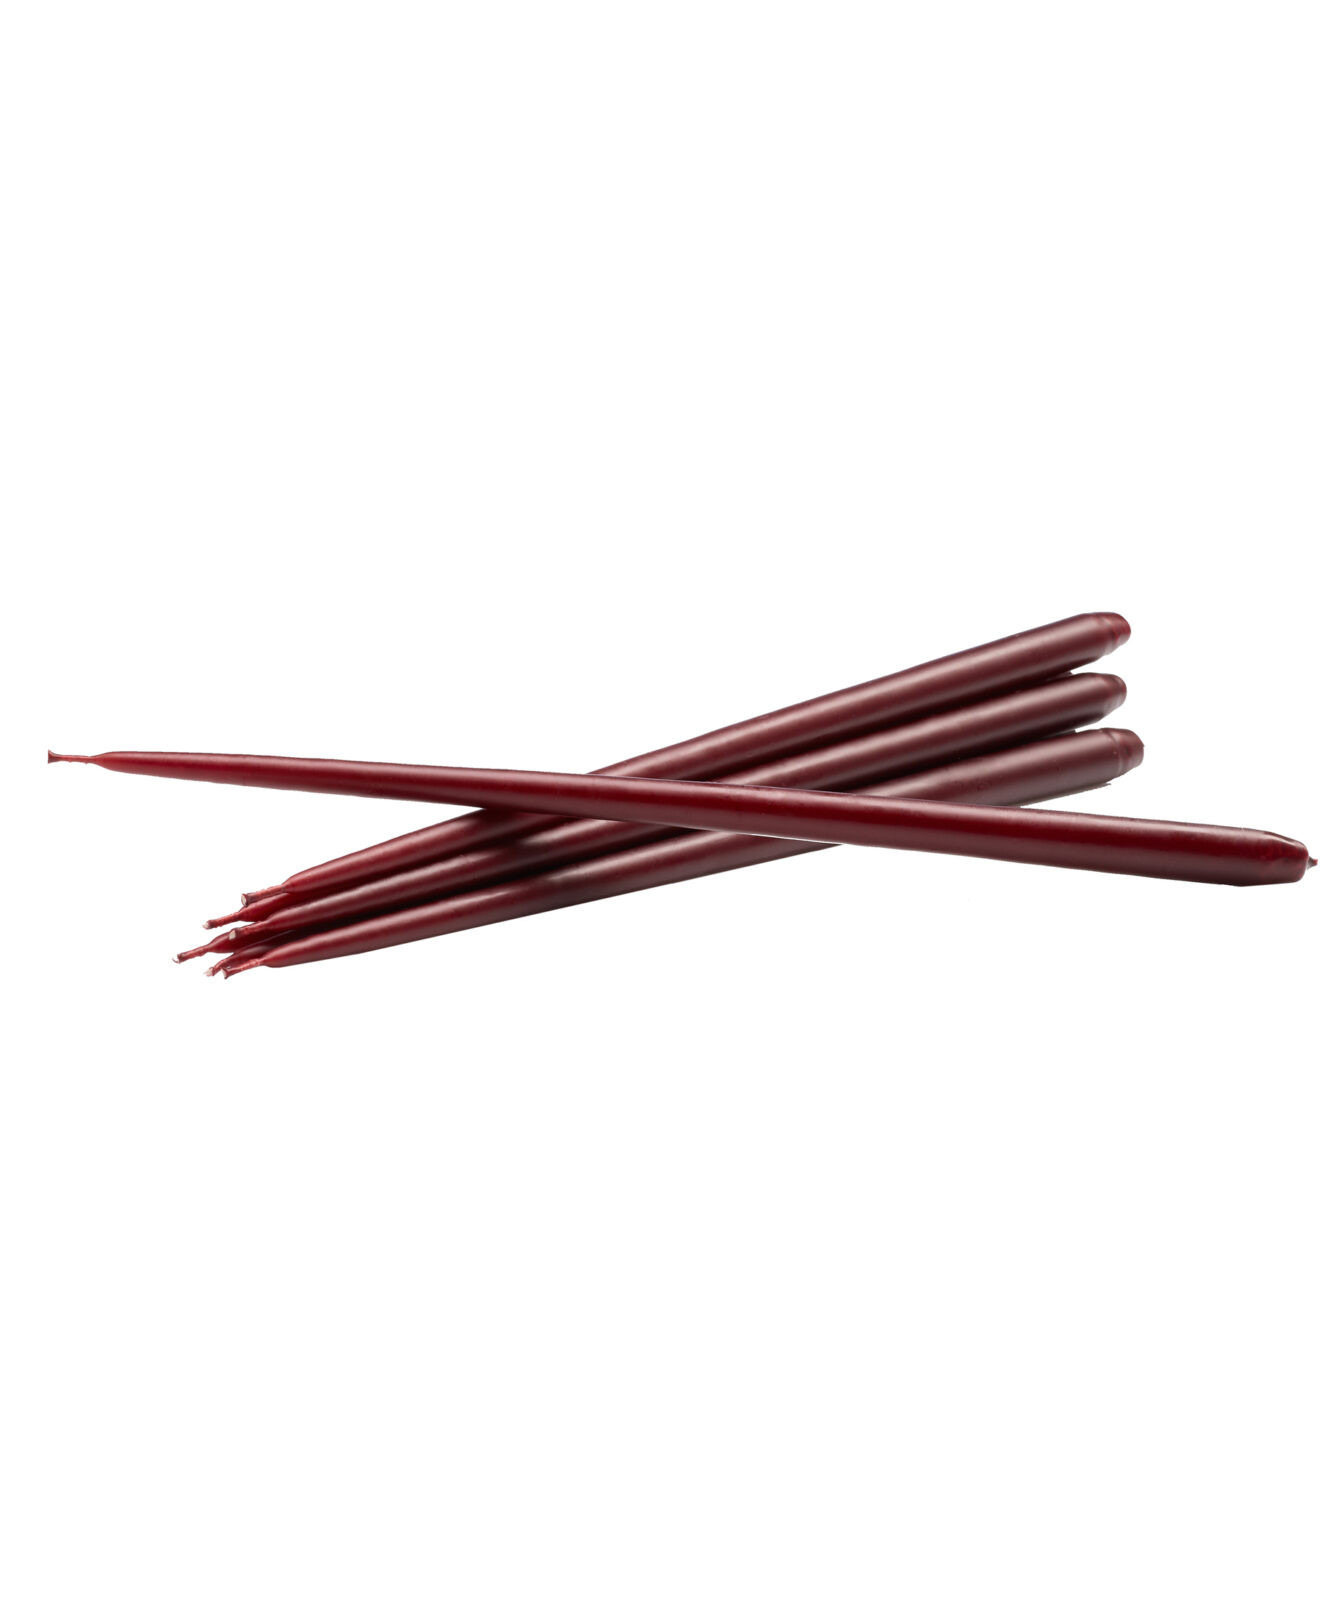 STOFF Nagel taper candles, burgundy red